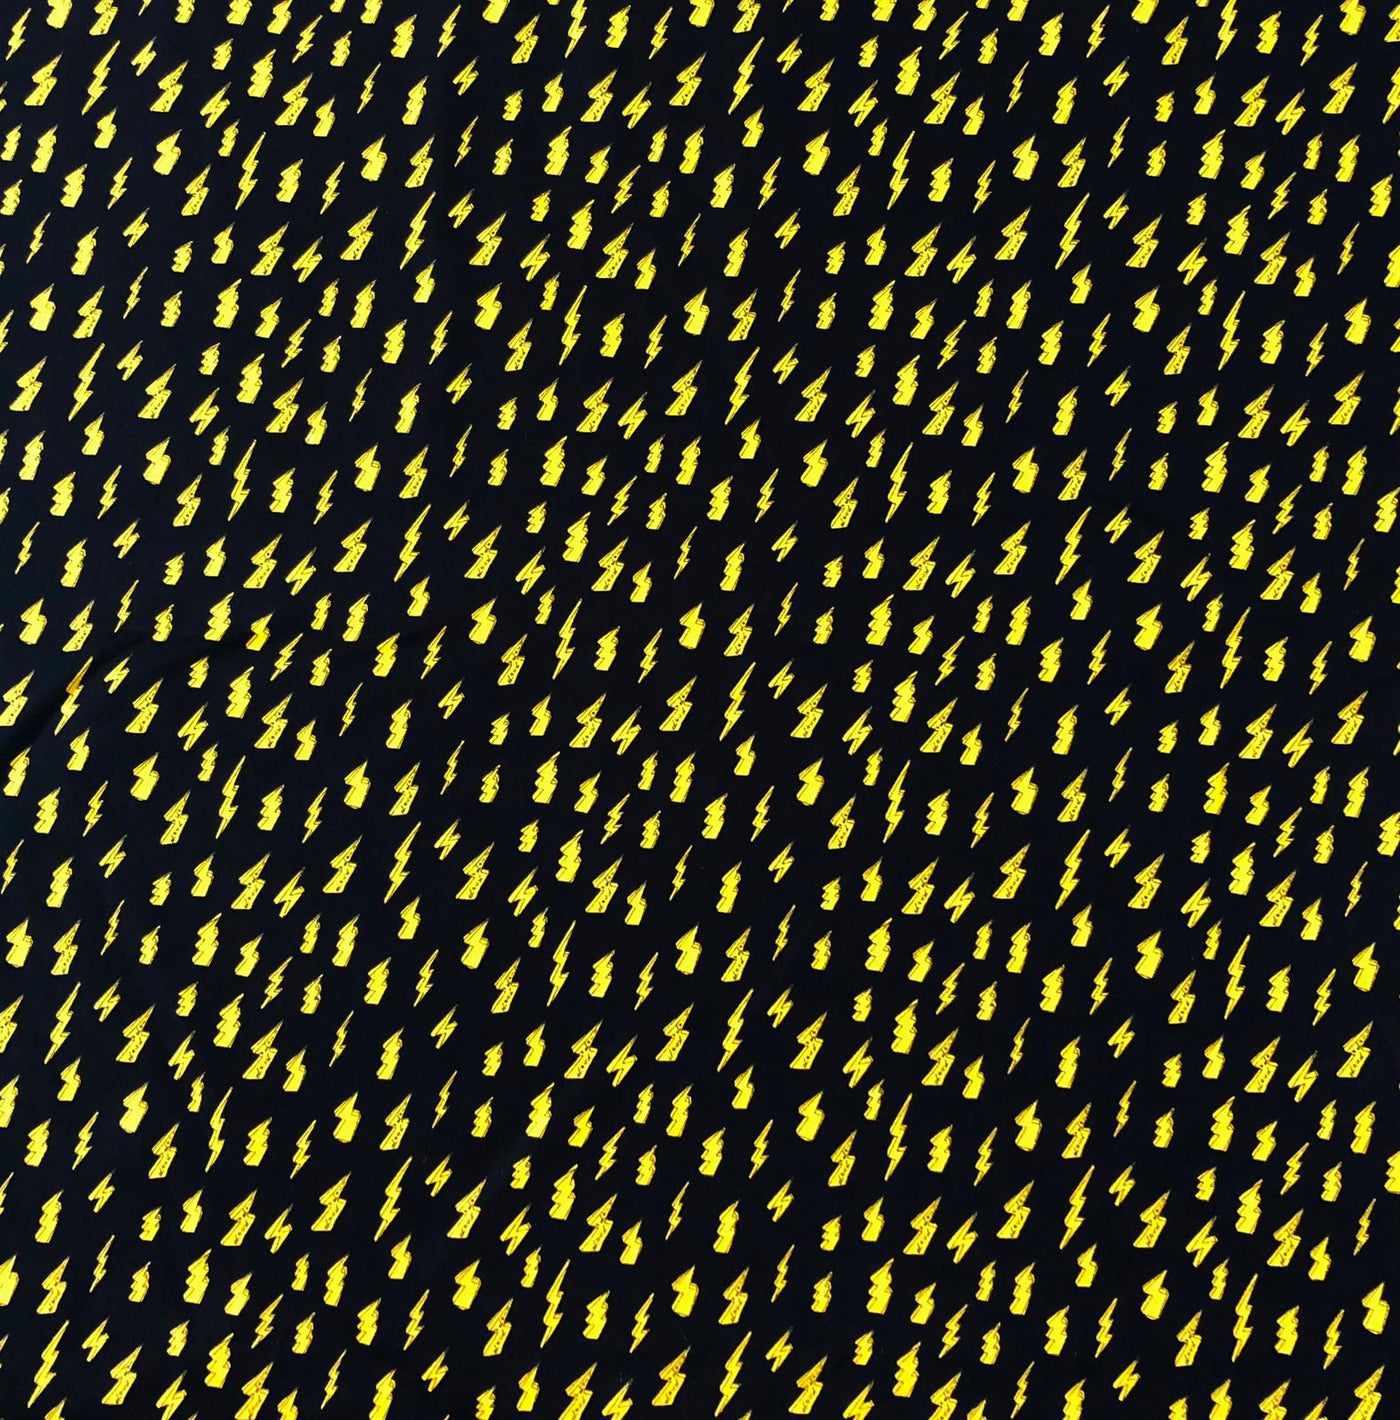 Lightning Bolts Strike 100% Cotton Fabric material perfect for Face Masks